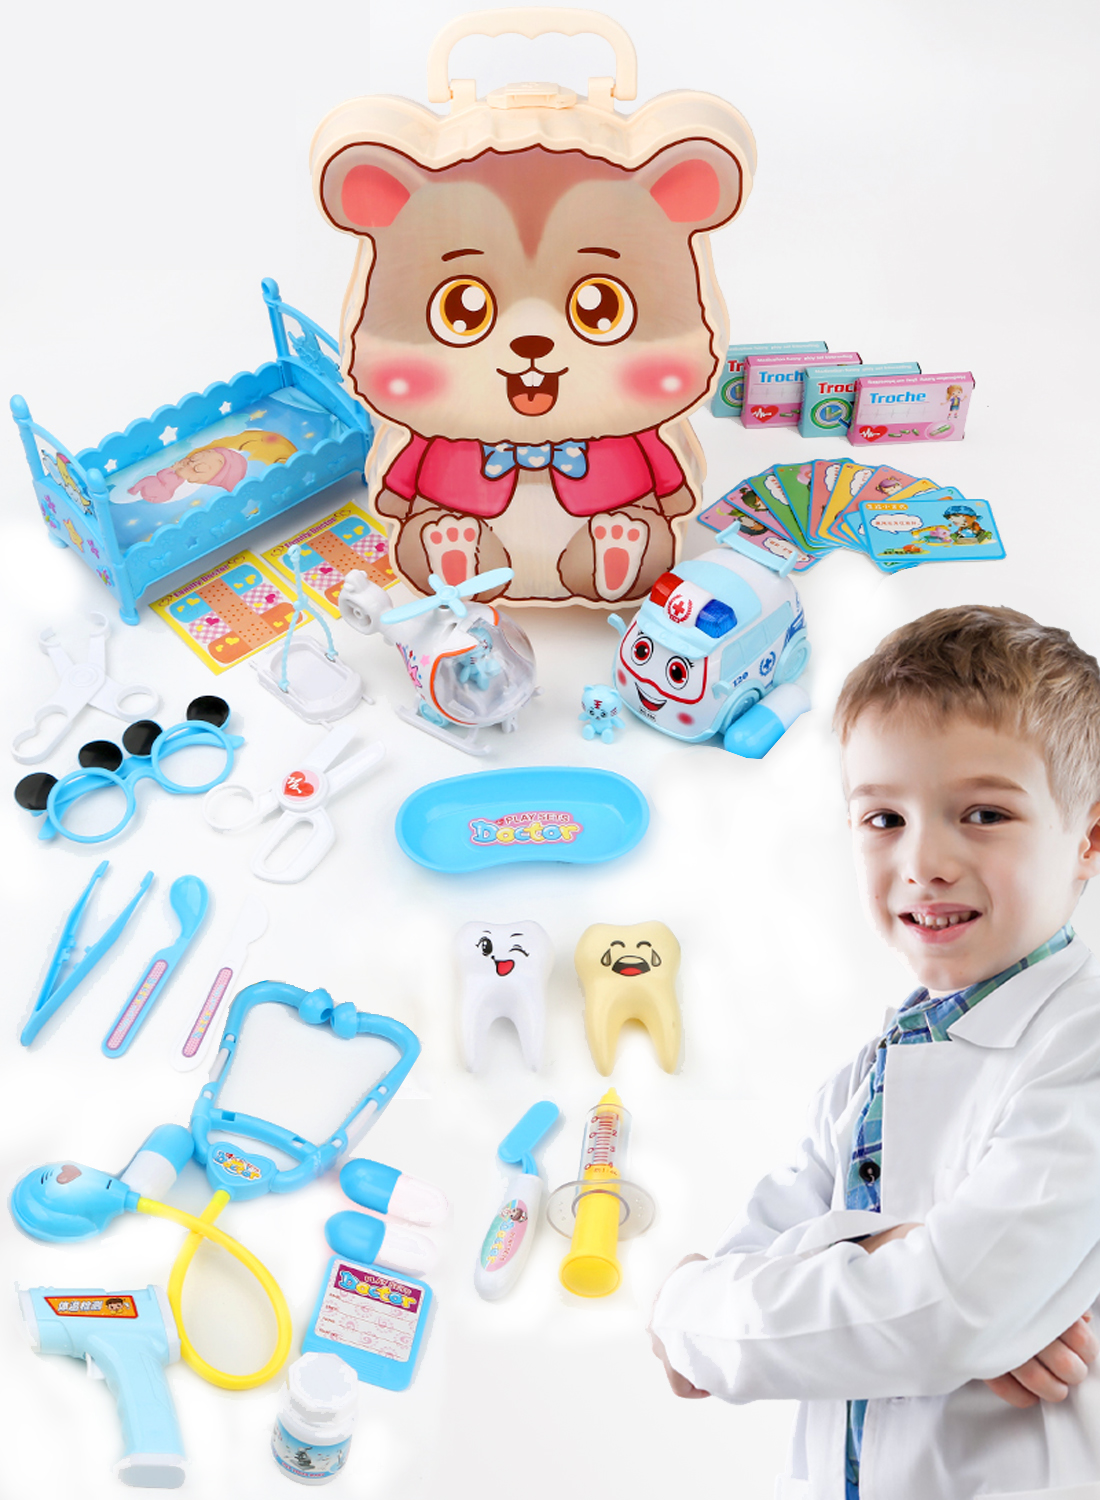 Doctor Kit for Kids, 45 Pcs Pretend Playset kit for Toddlers 3-5,Dentist Kit for Kids, Toys for Boys and Girls Fun Role Playing Game